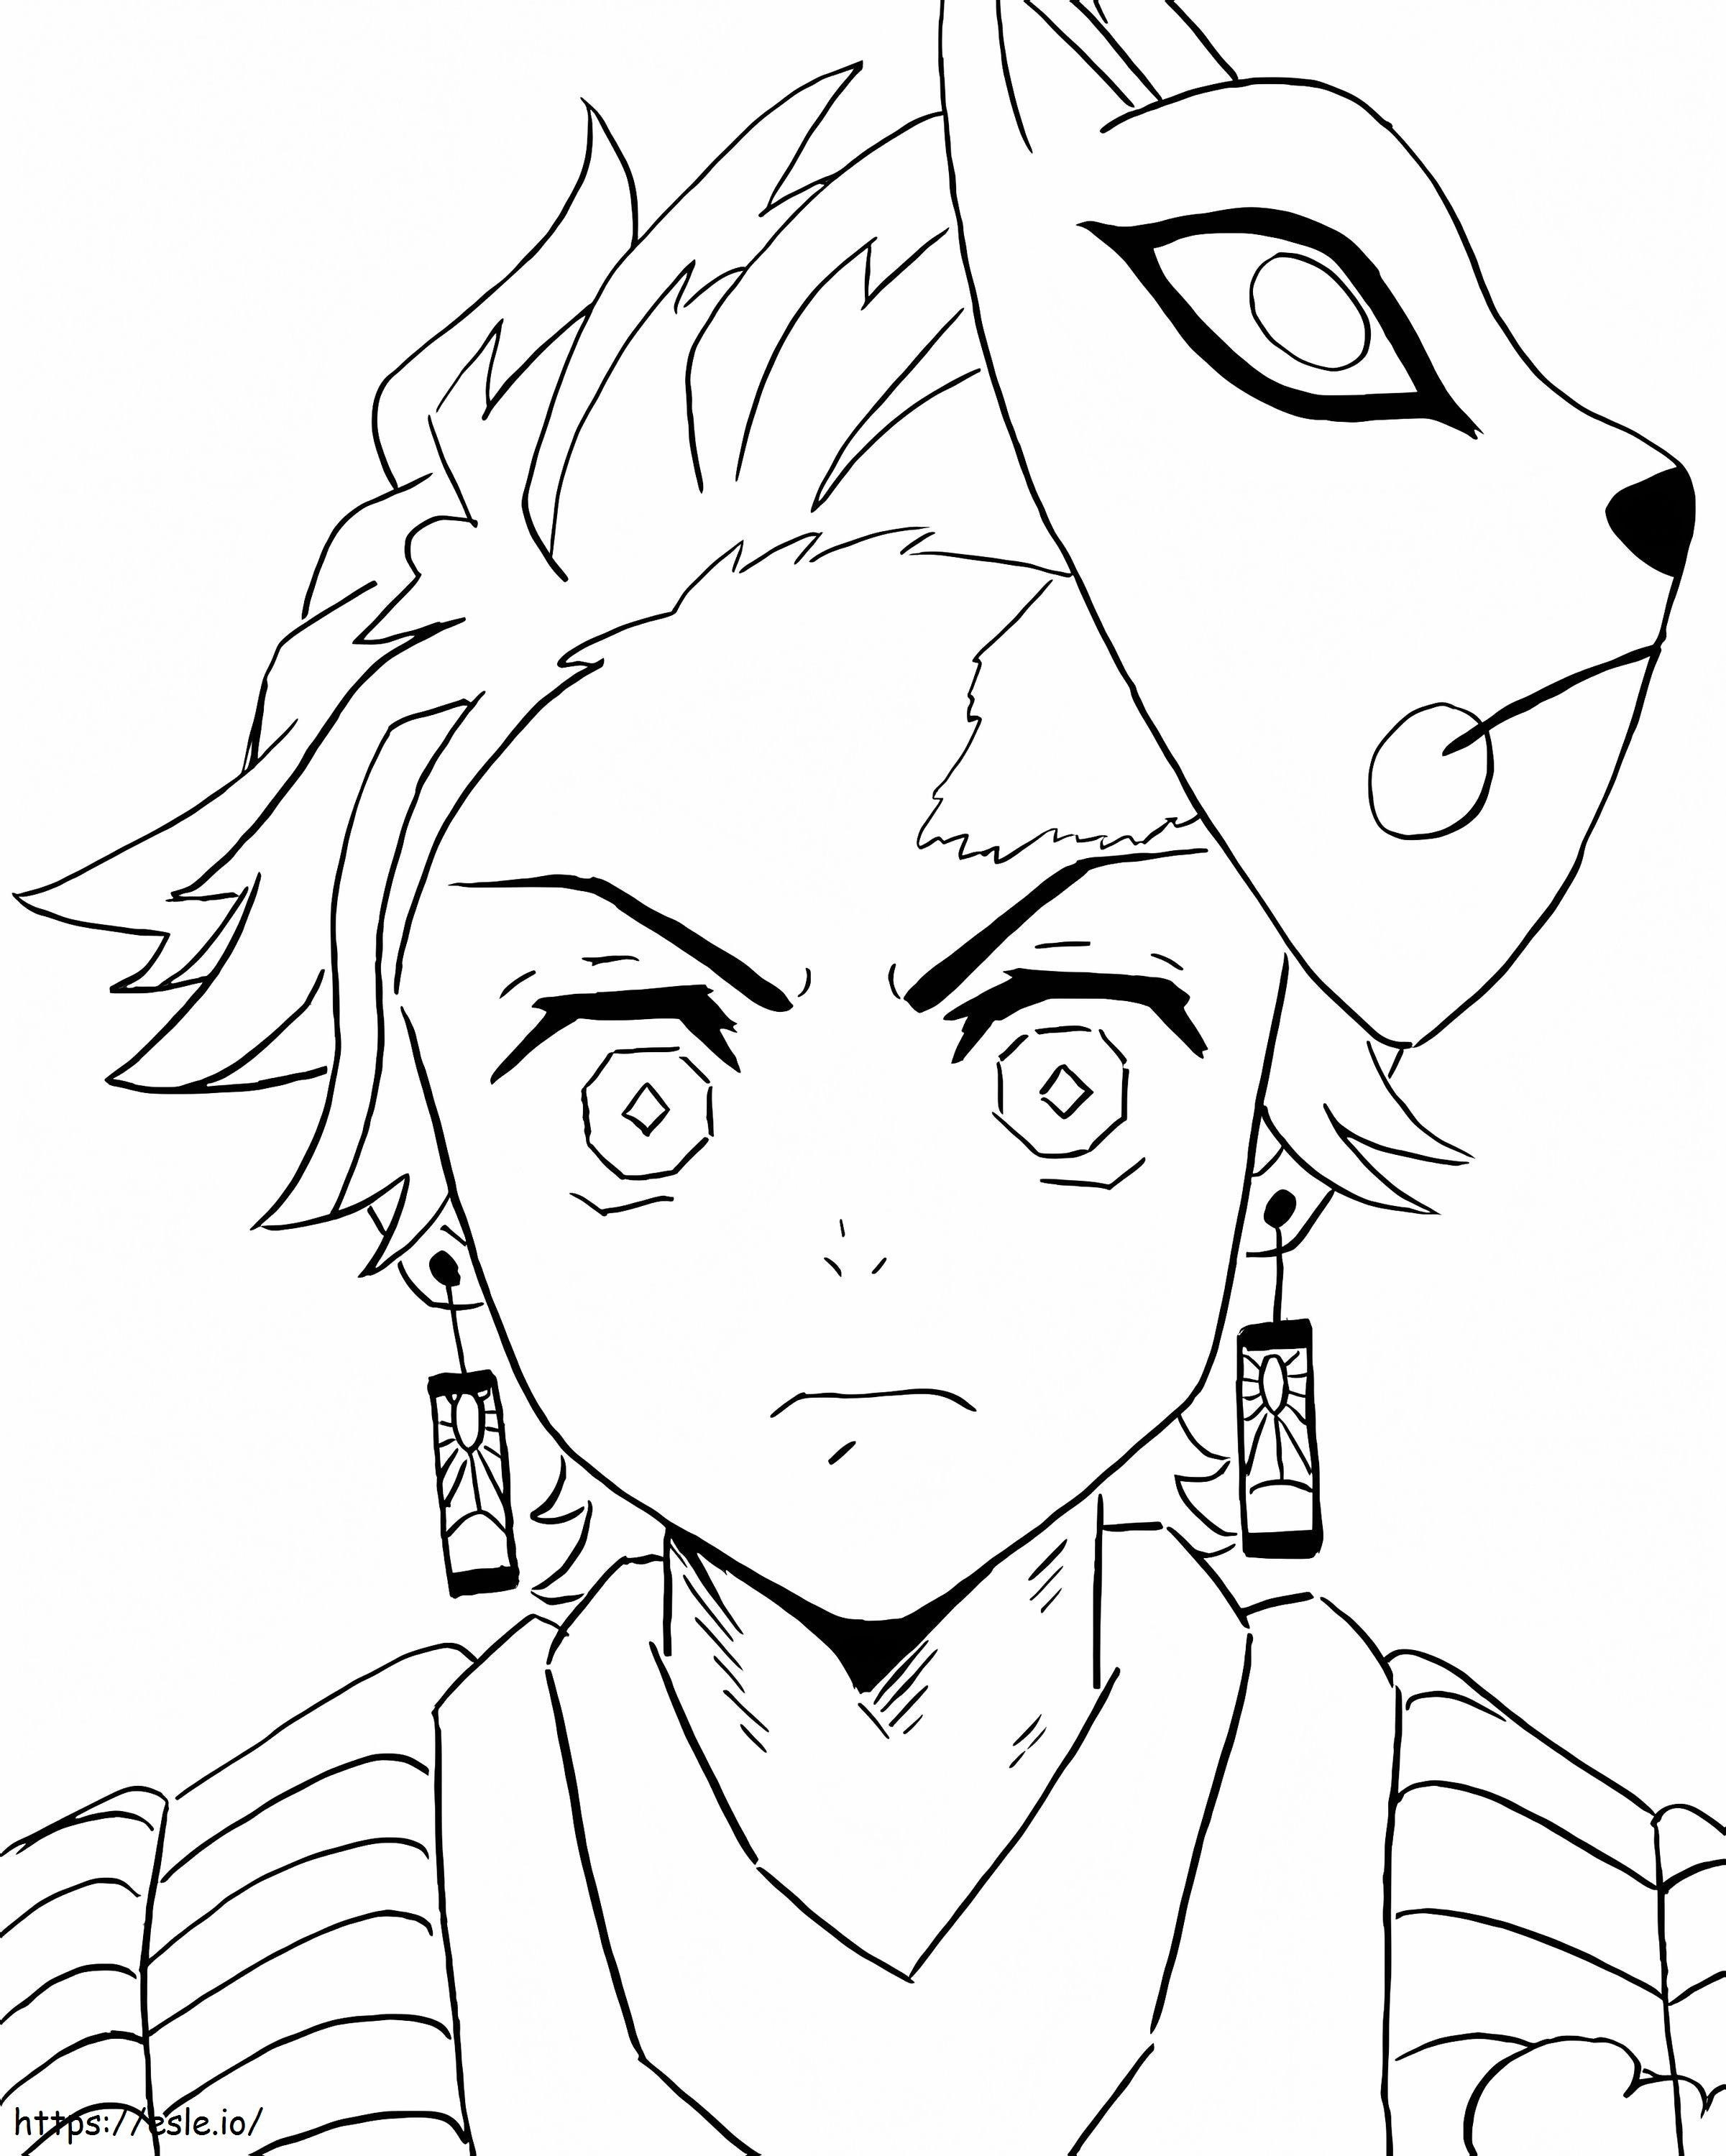 Angry Tanjiro coloring page